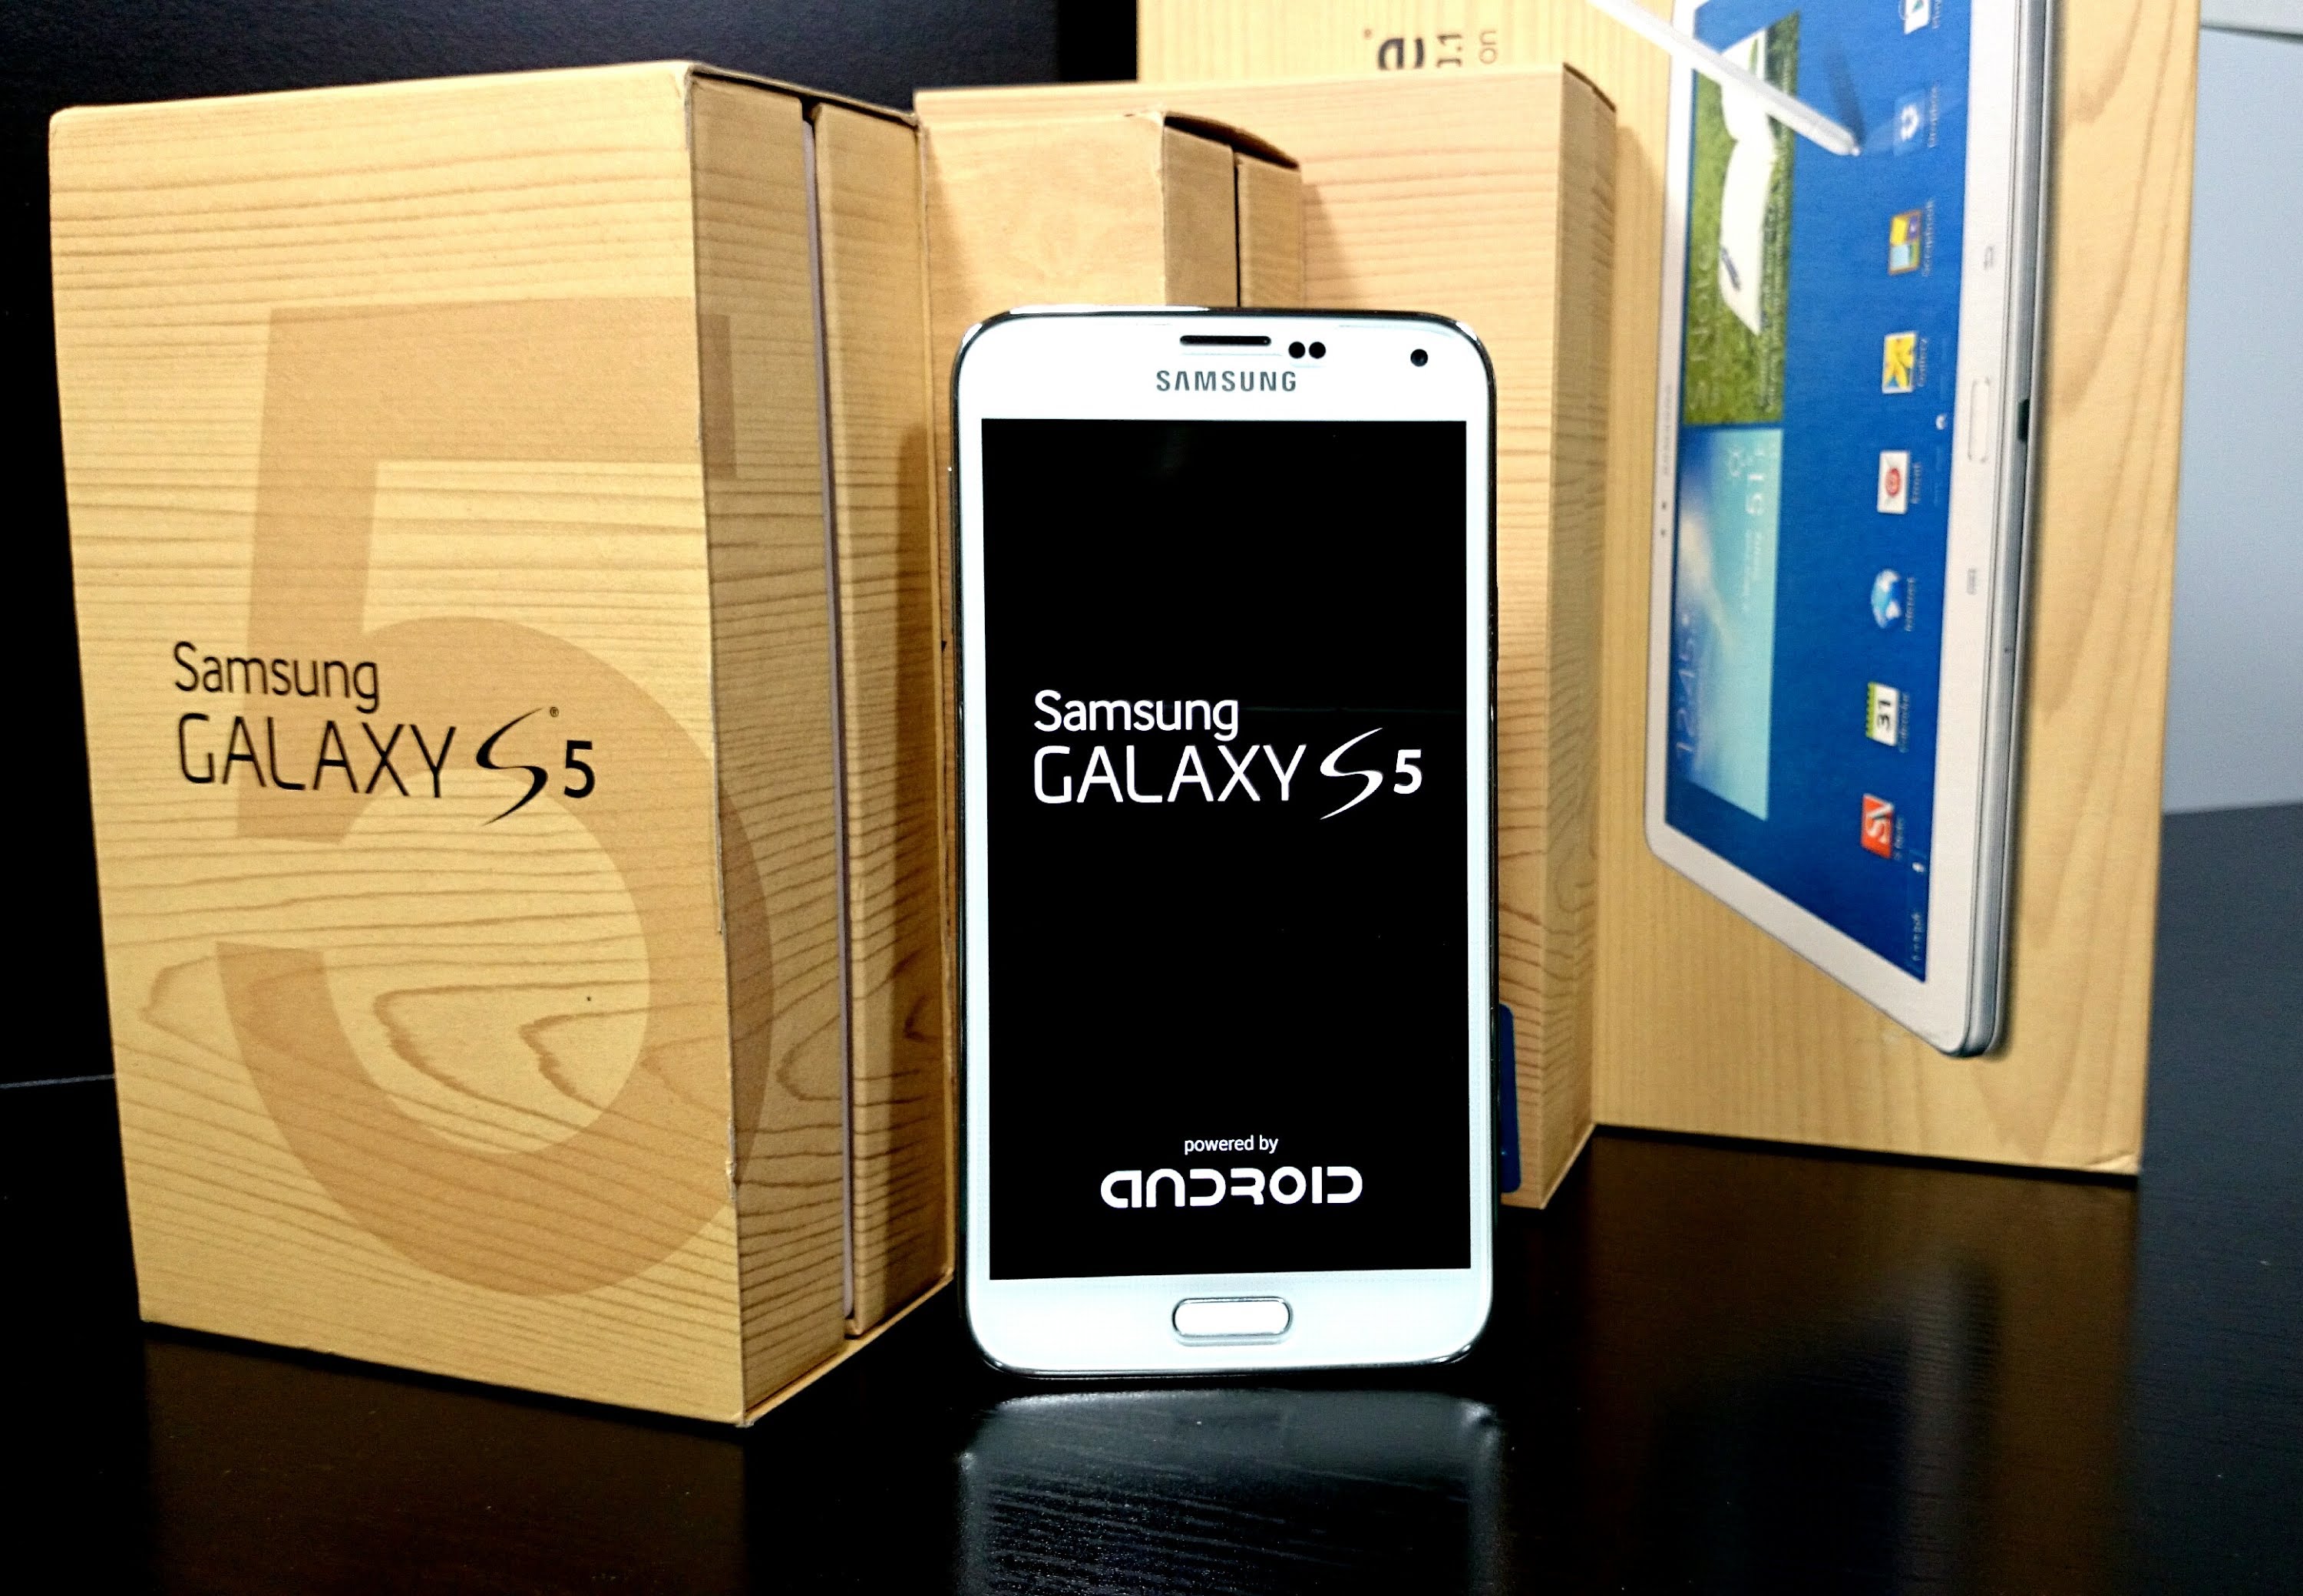 Galaxy S5 Review: “All You Need To Know”